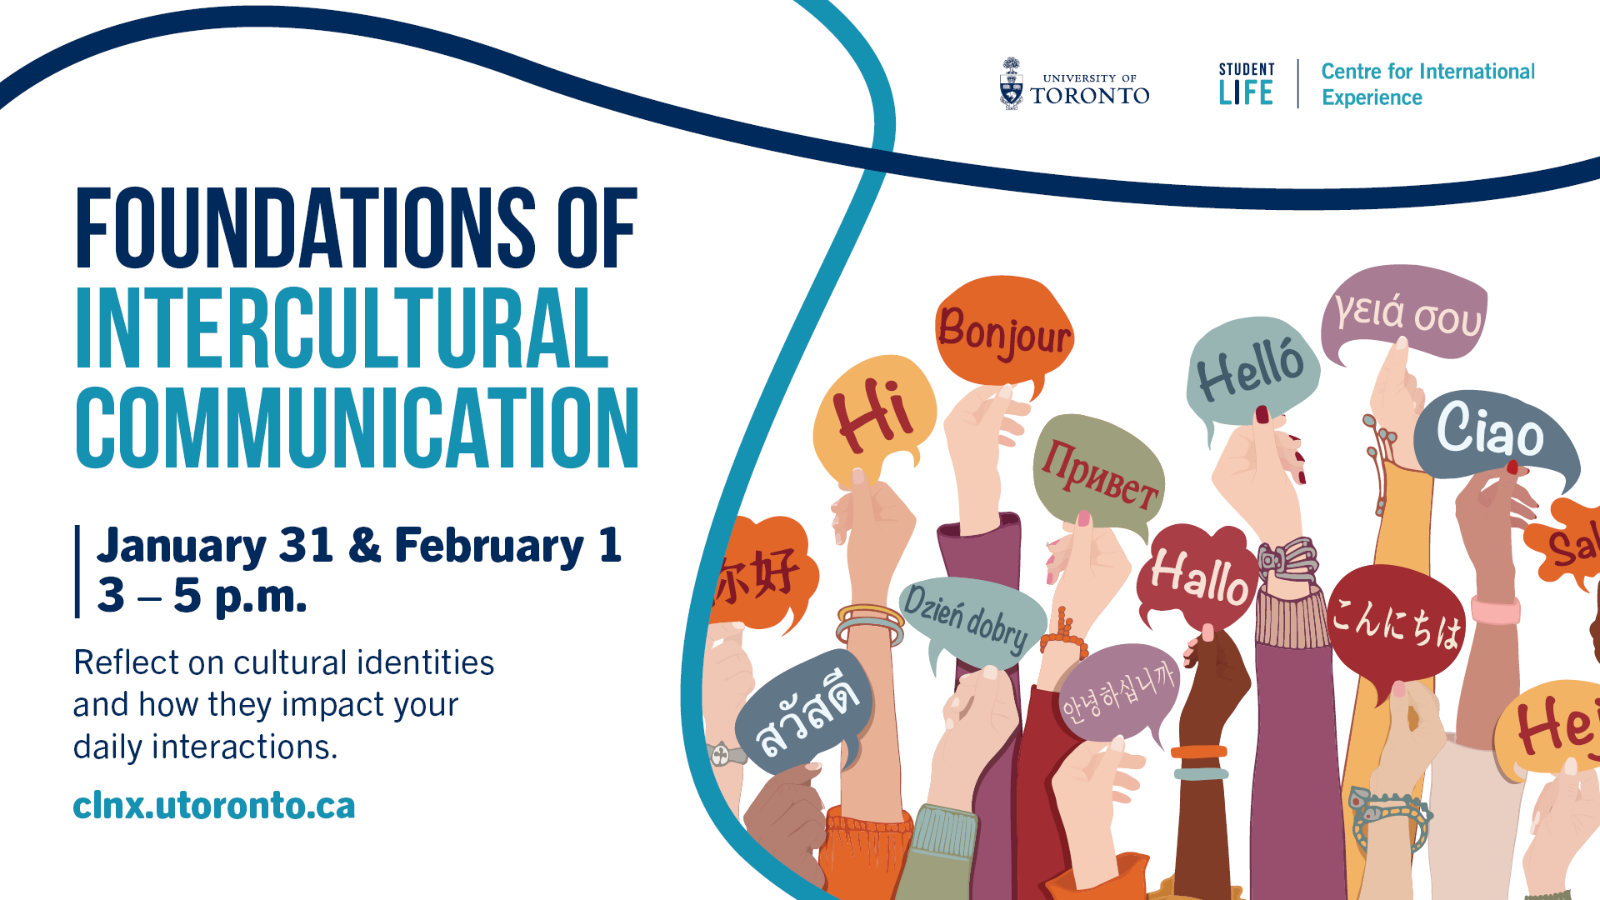 An image of "Hello" in different languages with text "Foundations of Intercultural Communication | January 31 & February 1, 3-5 PM. Reflect on cultural identities and how they impact your daily interactions. clnx.utoronto.ca". 